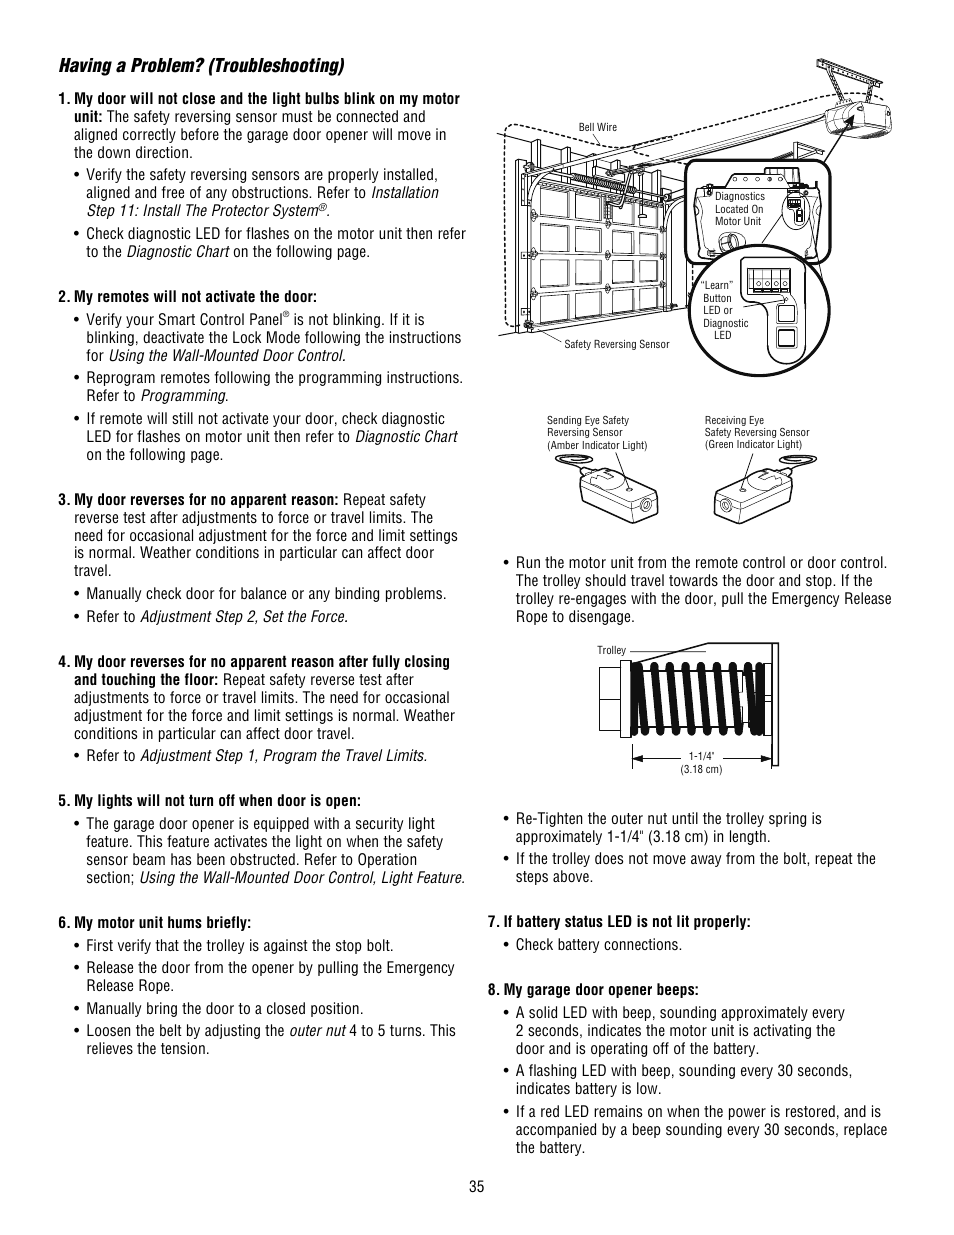 Having A Problem Troubleshooting Chamberlain Whisper Drive Hd900d User Manual Page 35 88